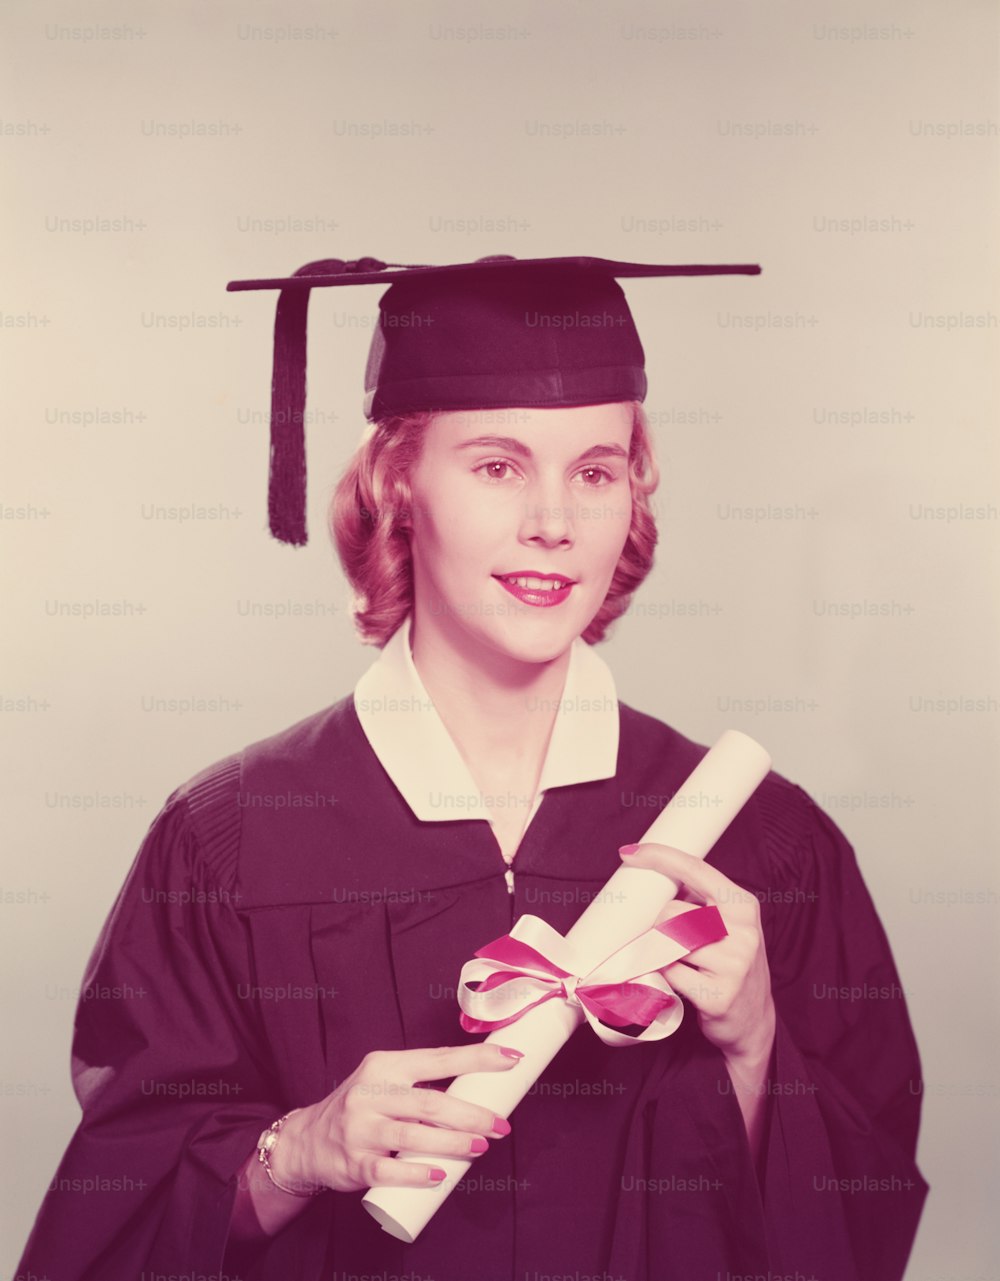 UNITED STATES - CIRCA 1950s:  Young woman wearing graduation robes and mortarboard, holding diploma tied with red and white ribbon.